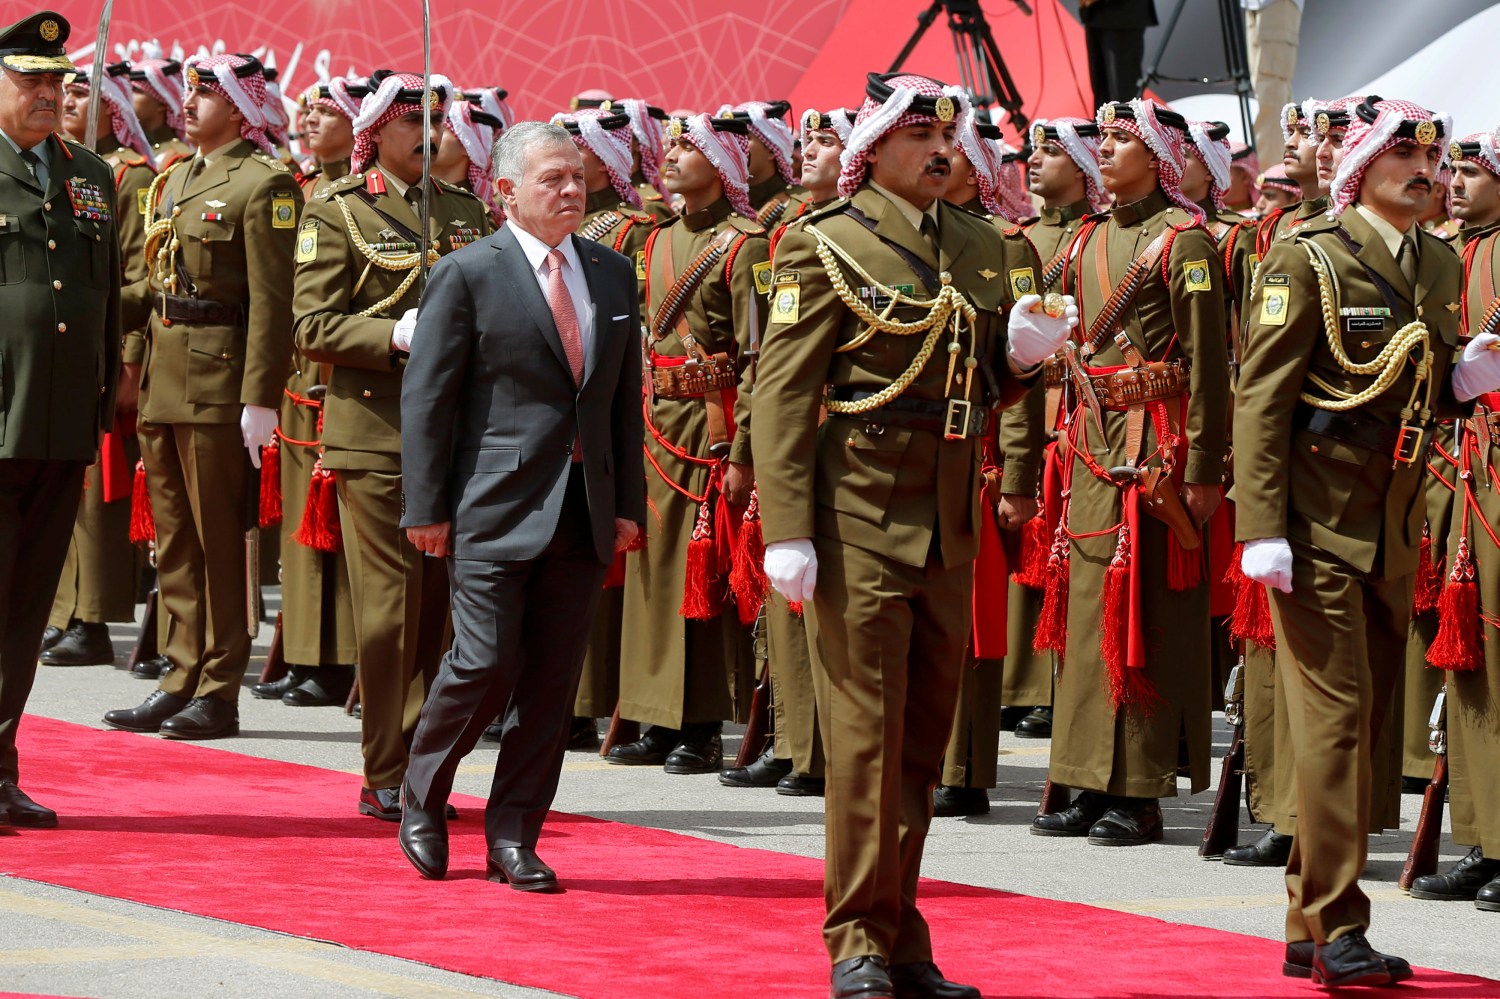 Jordan's King Abdullah reviews the guard of honour during a ceremony celebrating the country's 73rd Independence Day in Amman, Jordan, May 25, 2019. REUTERS/Muhammad Hamed - RC122FB03AE0